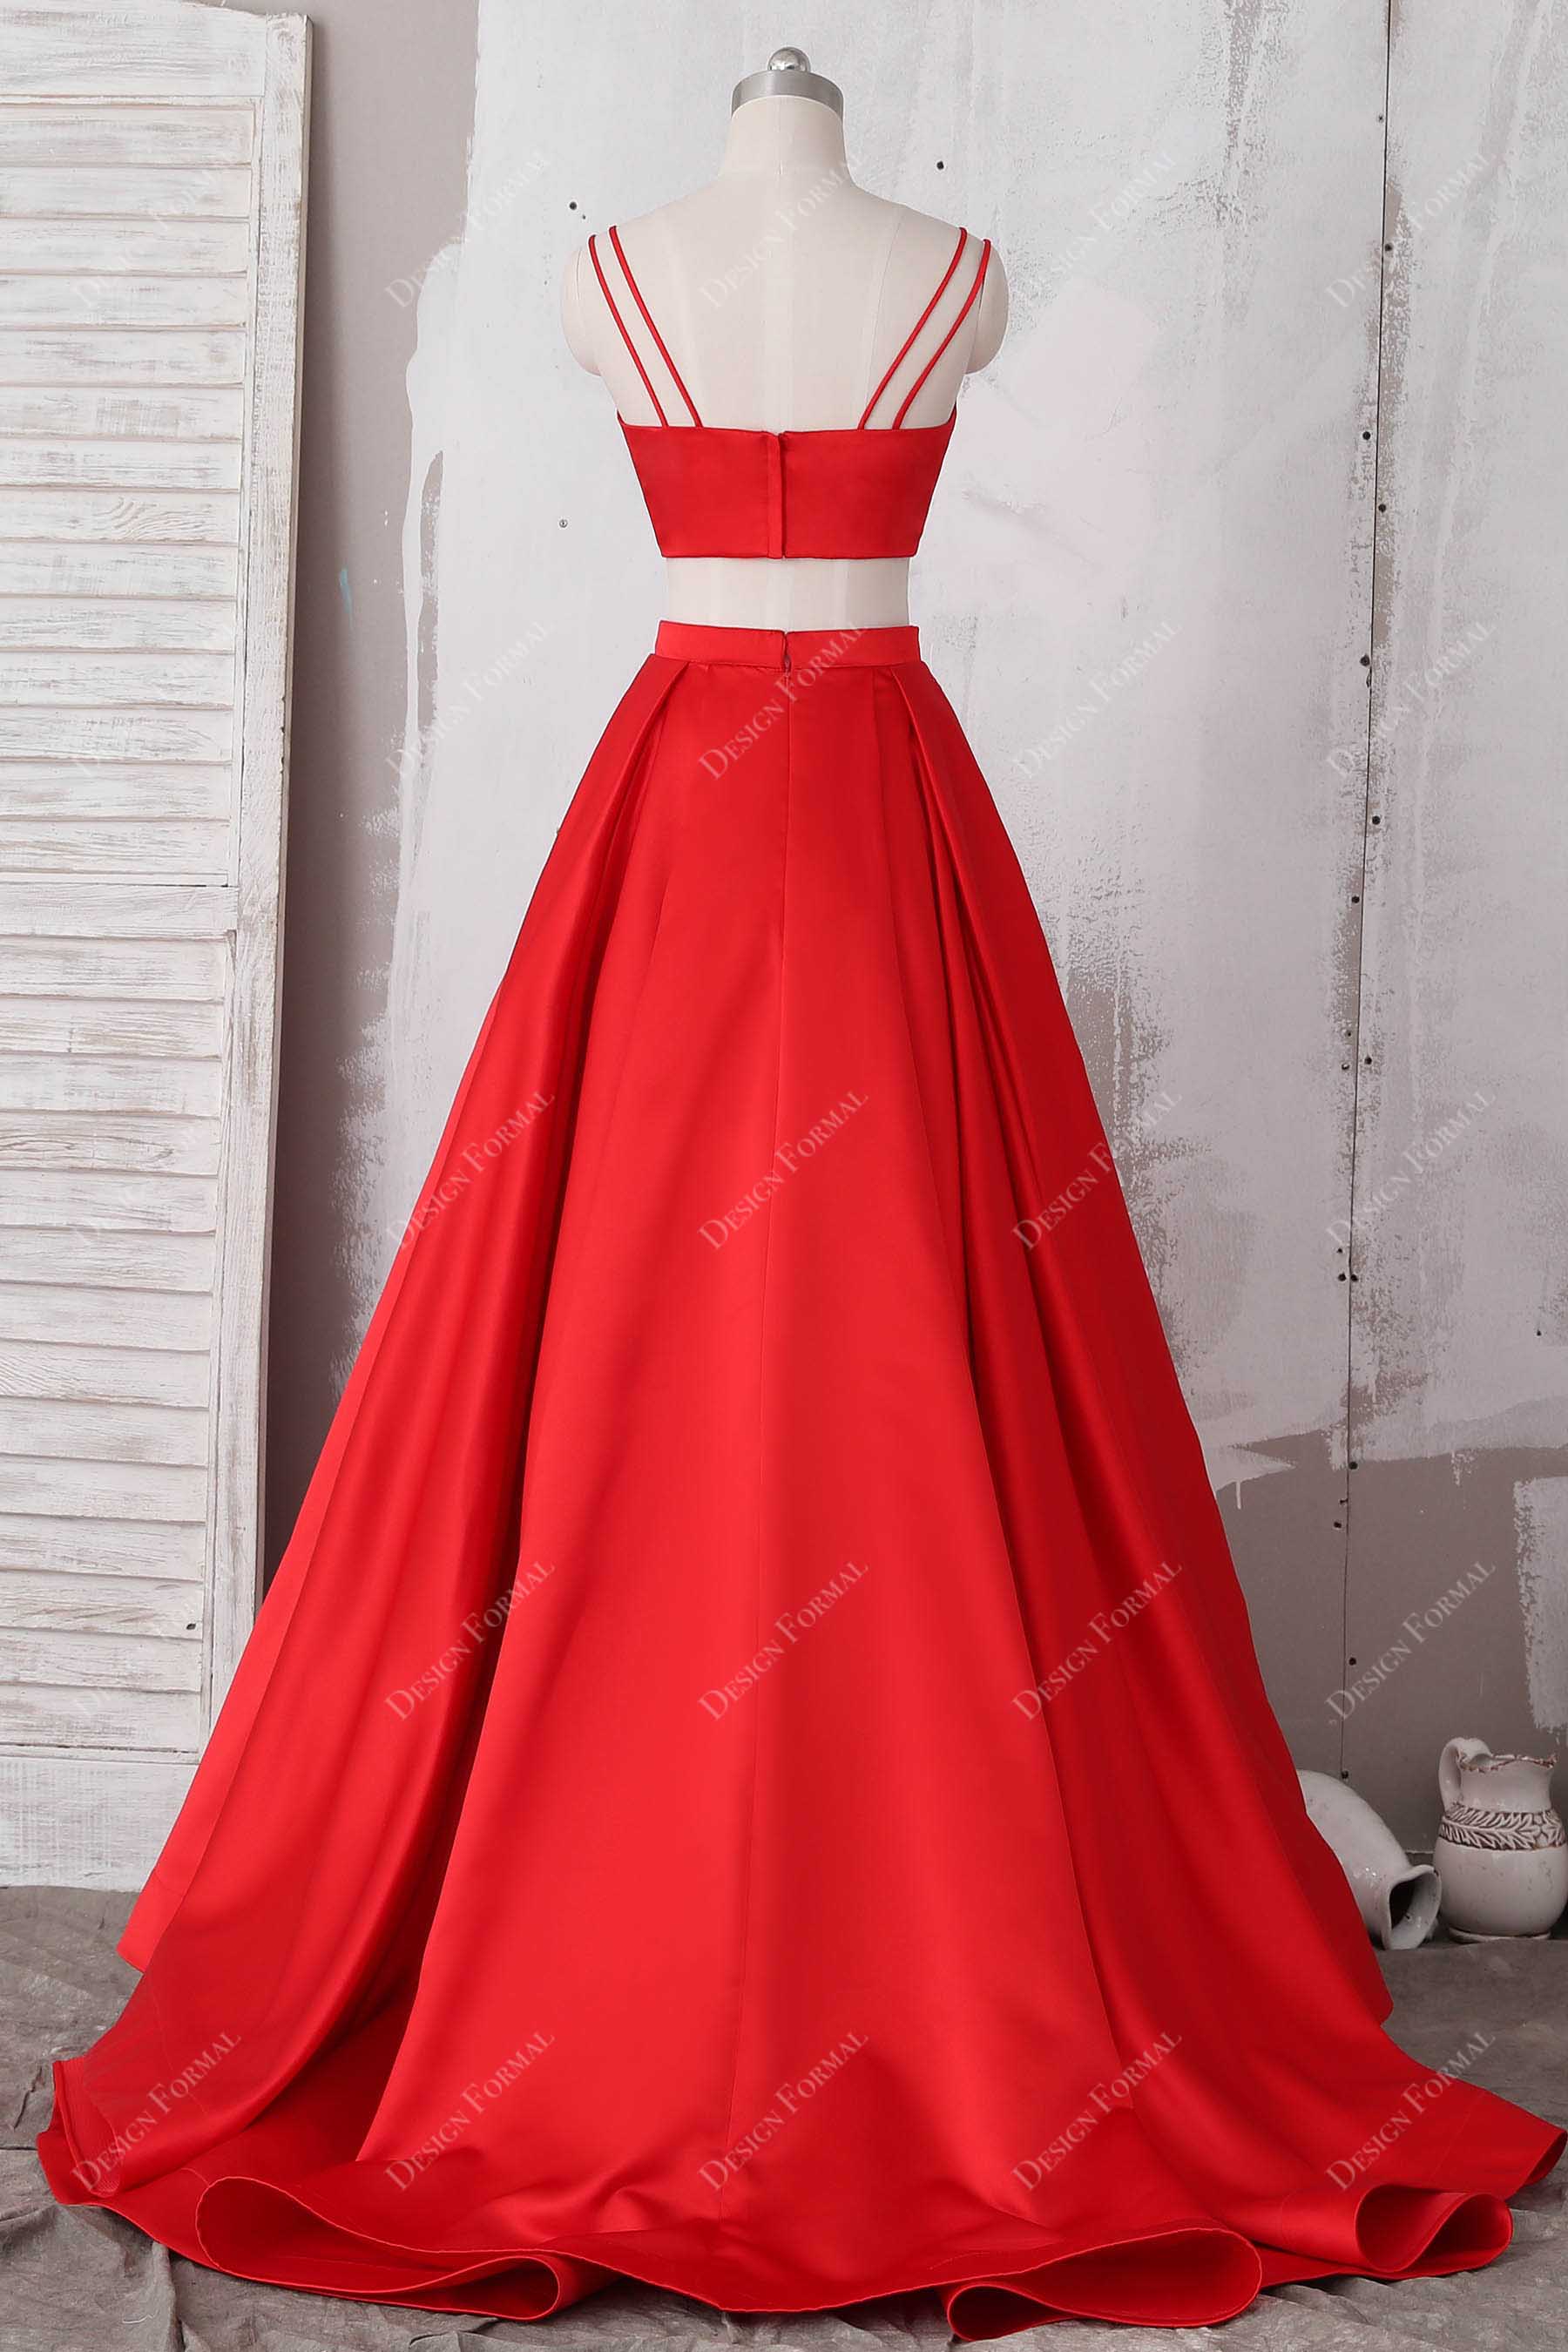 Illusion off/one shoulder red sparkle beaded ball gown wedding dress with  glitter tulle - various styles